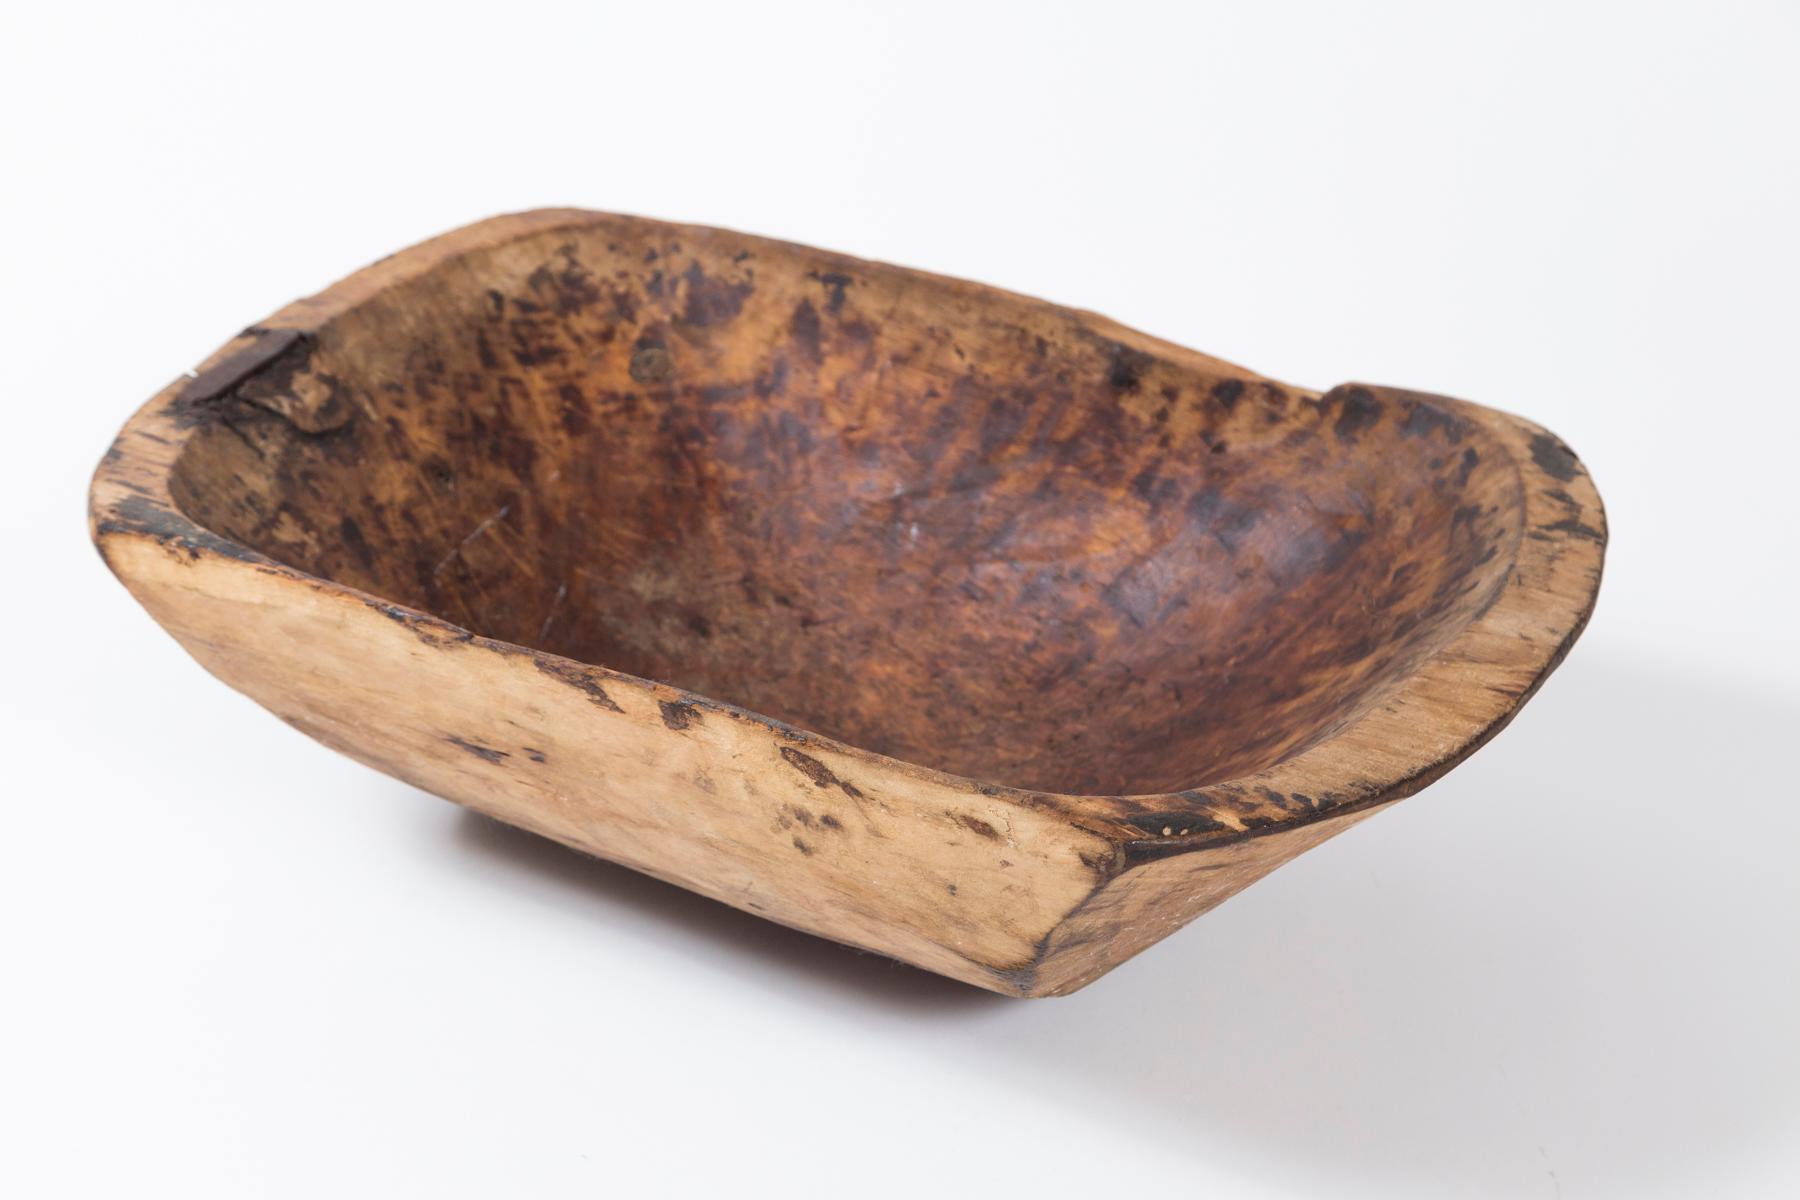 Rustic European Hand-Carved Wood Bowl, Early 20th Century